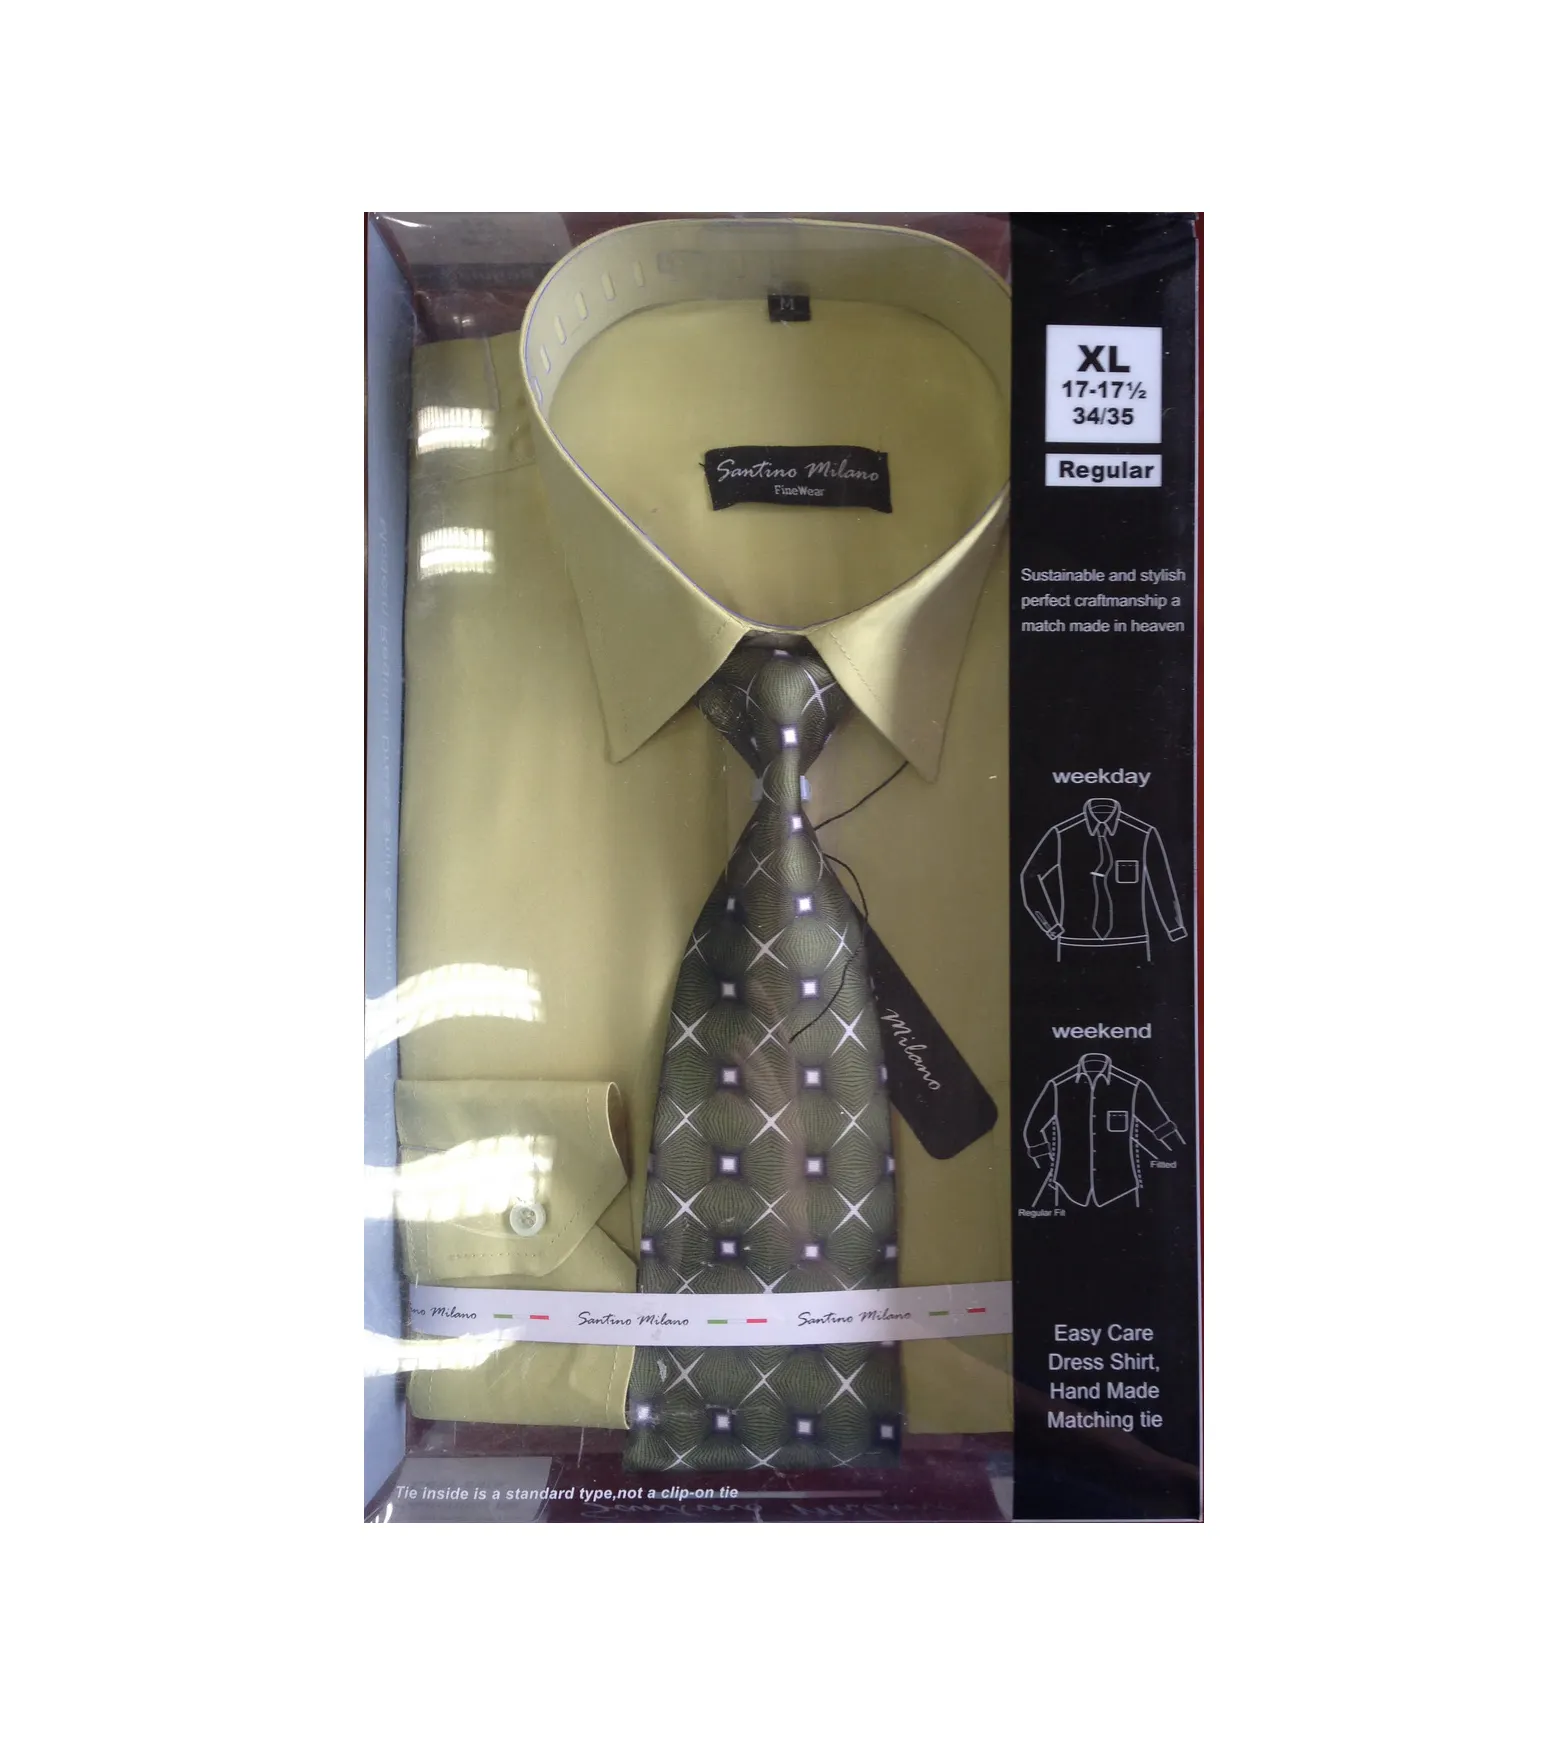 Men's dress shirt with tie gift box package plastic box packing shirt with tie